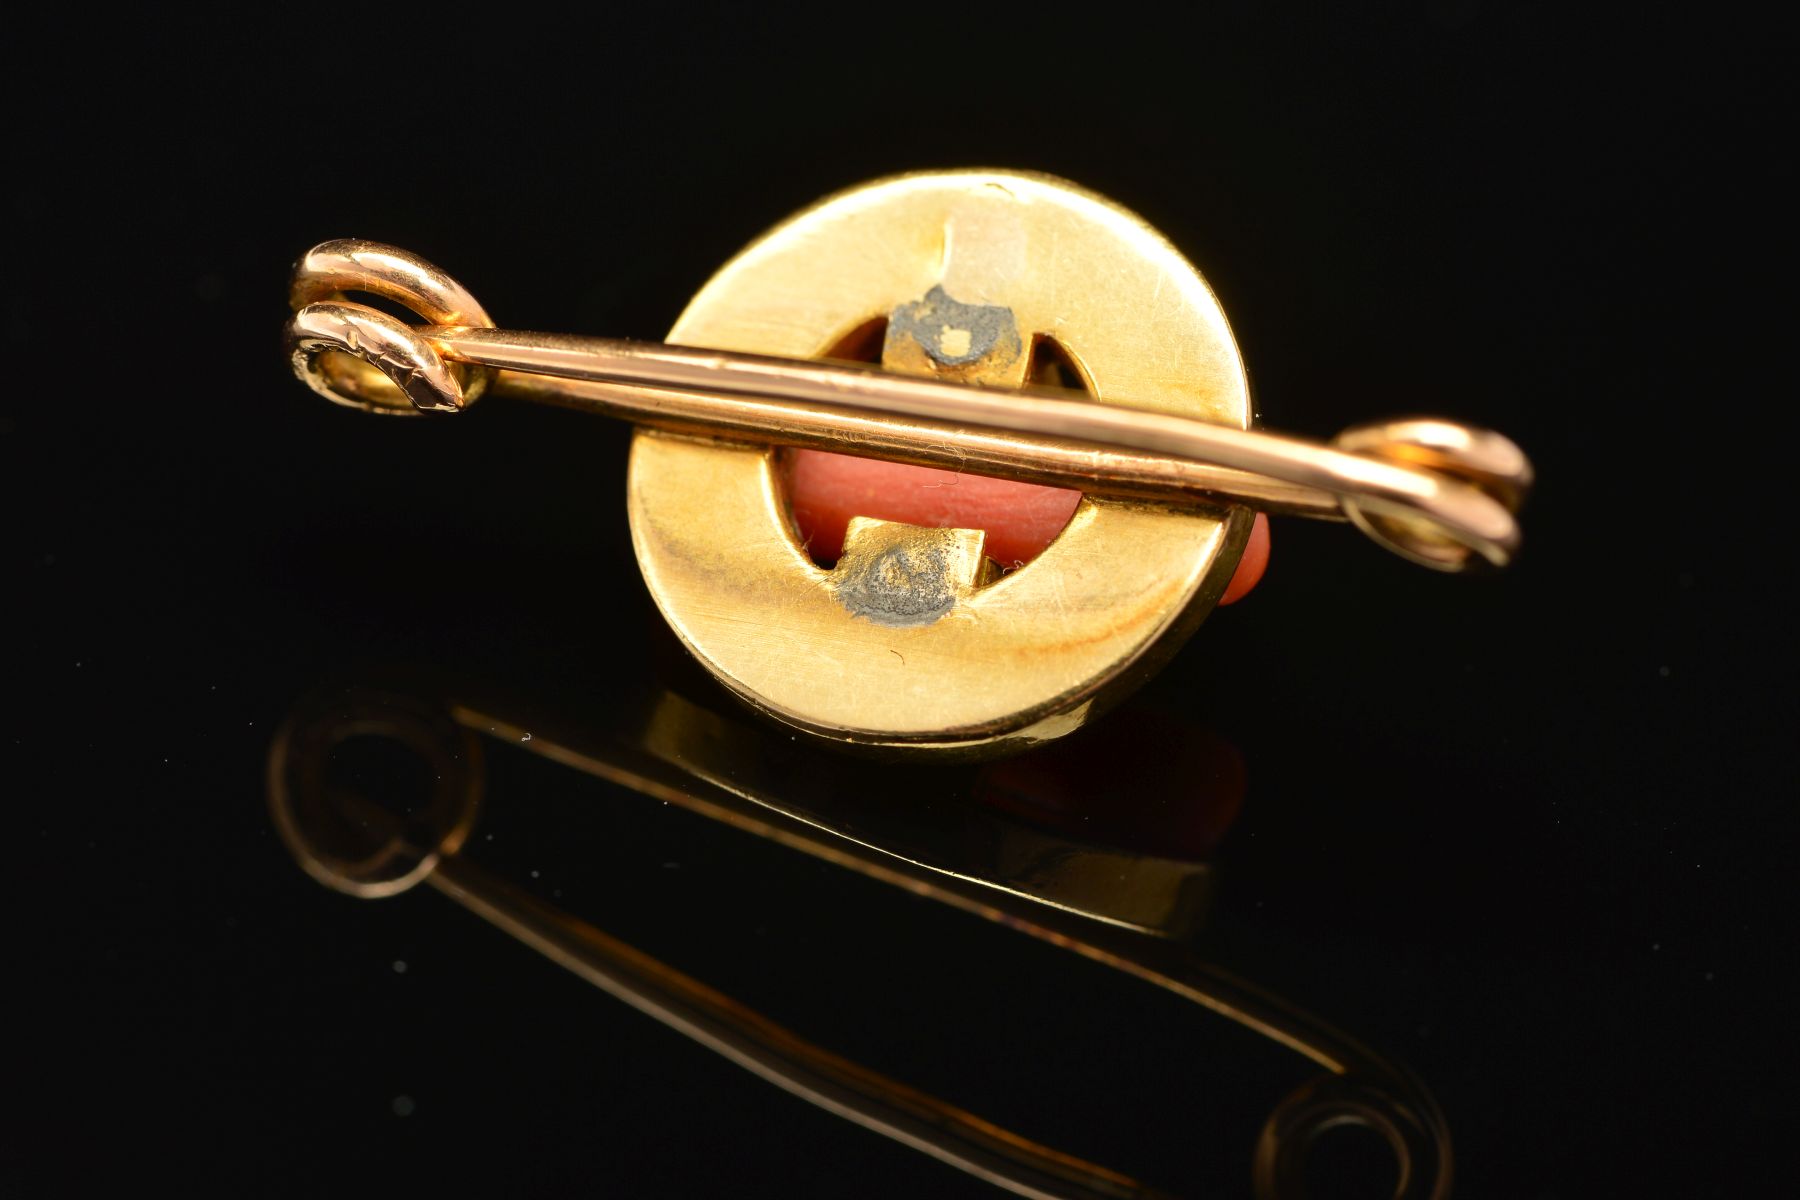 AN ART DECO GOLD, CORAL AND DIAMOND BROOCH, designed as a central circular panel encasing a polished - Image 4 of 5